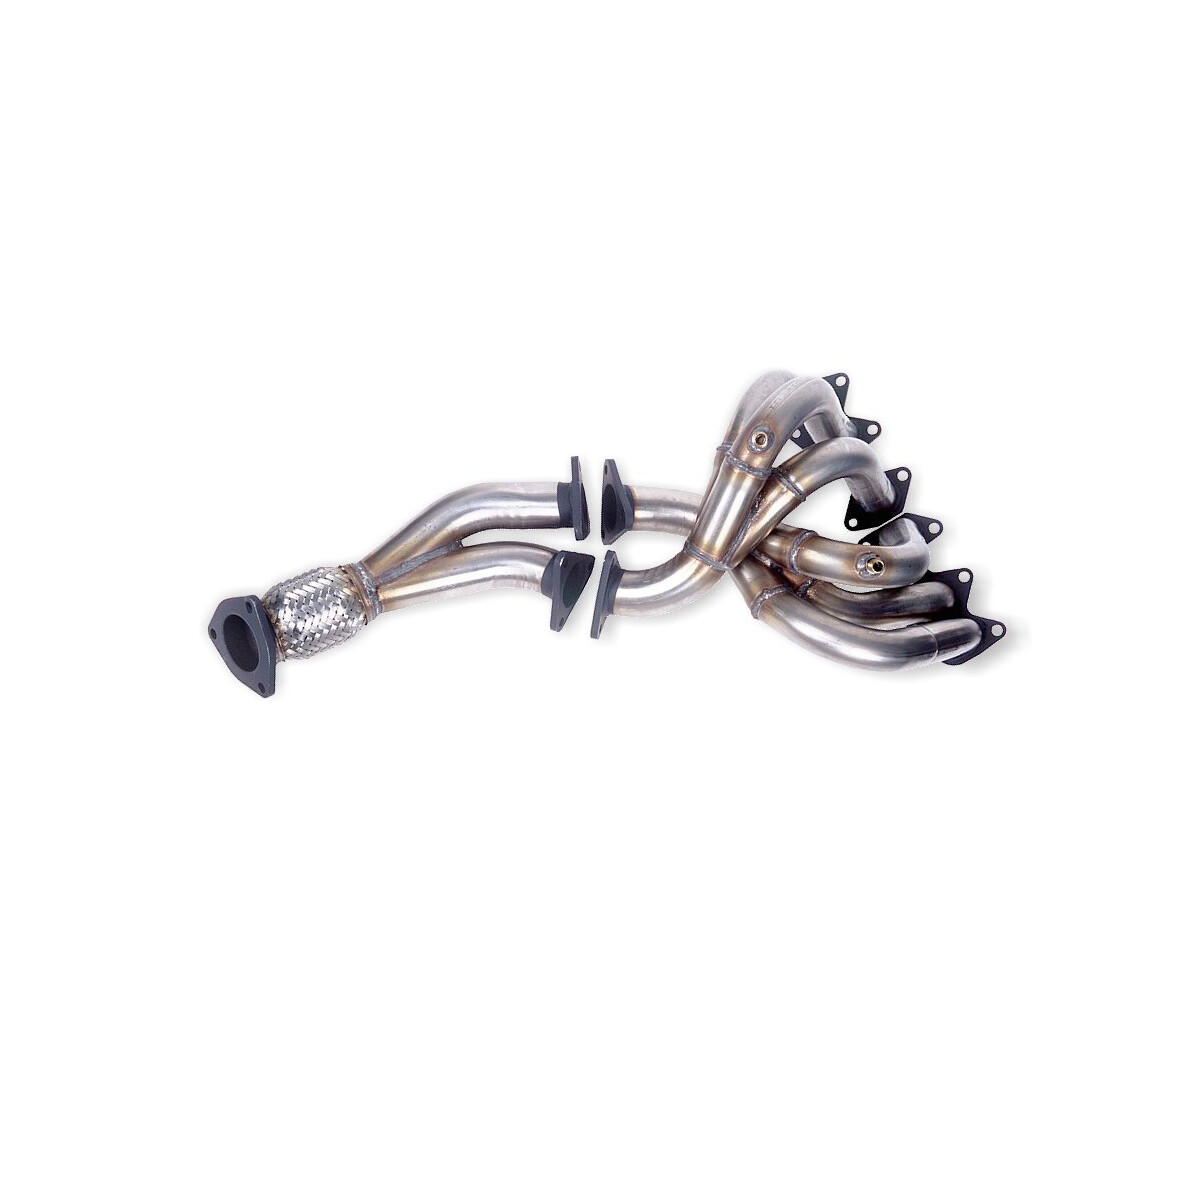 TeZet stainless steel exhaust header for R21 2L Turbo...